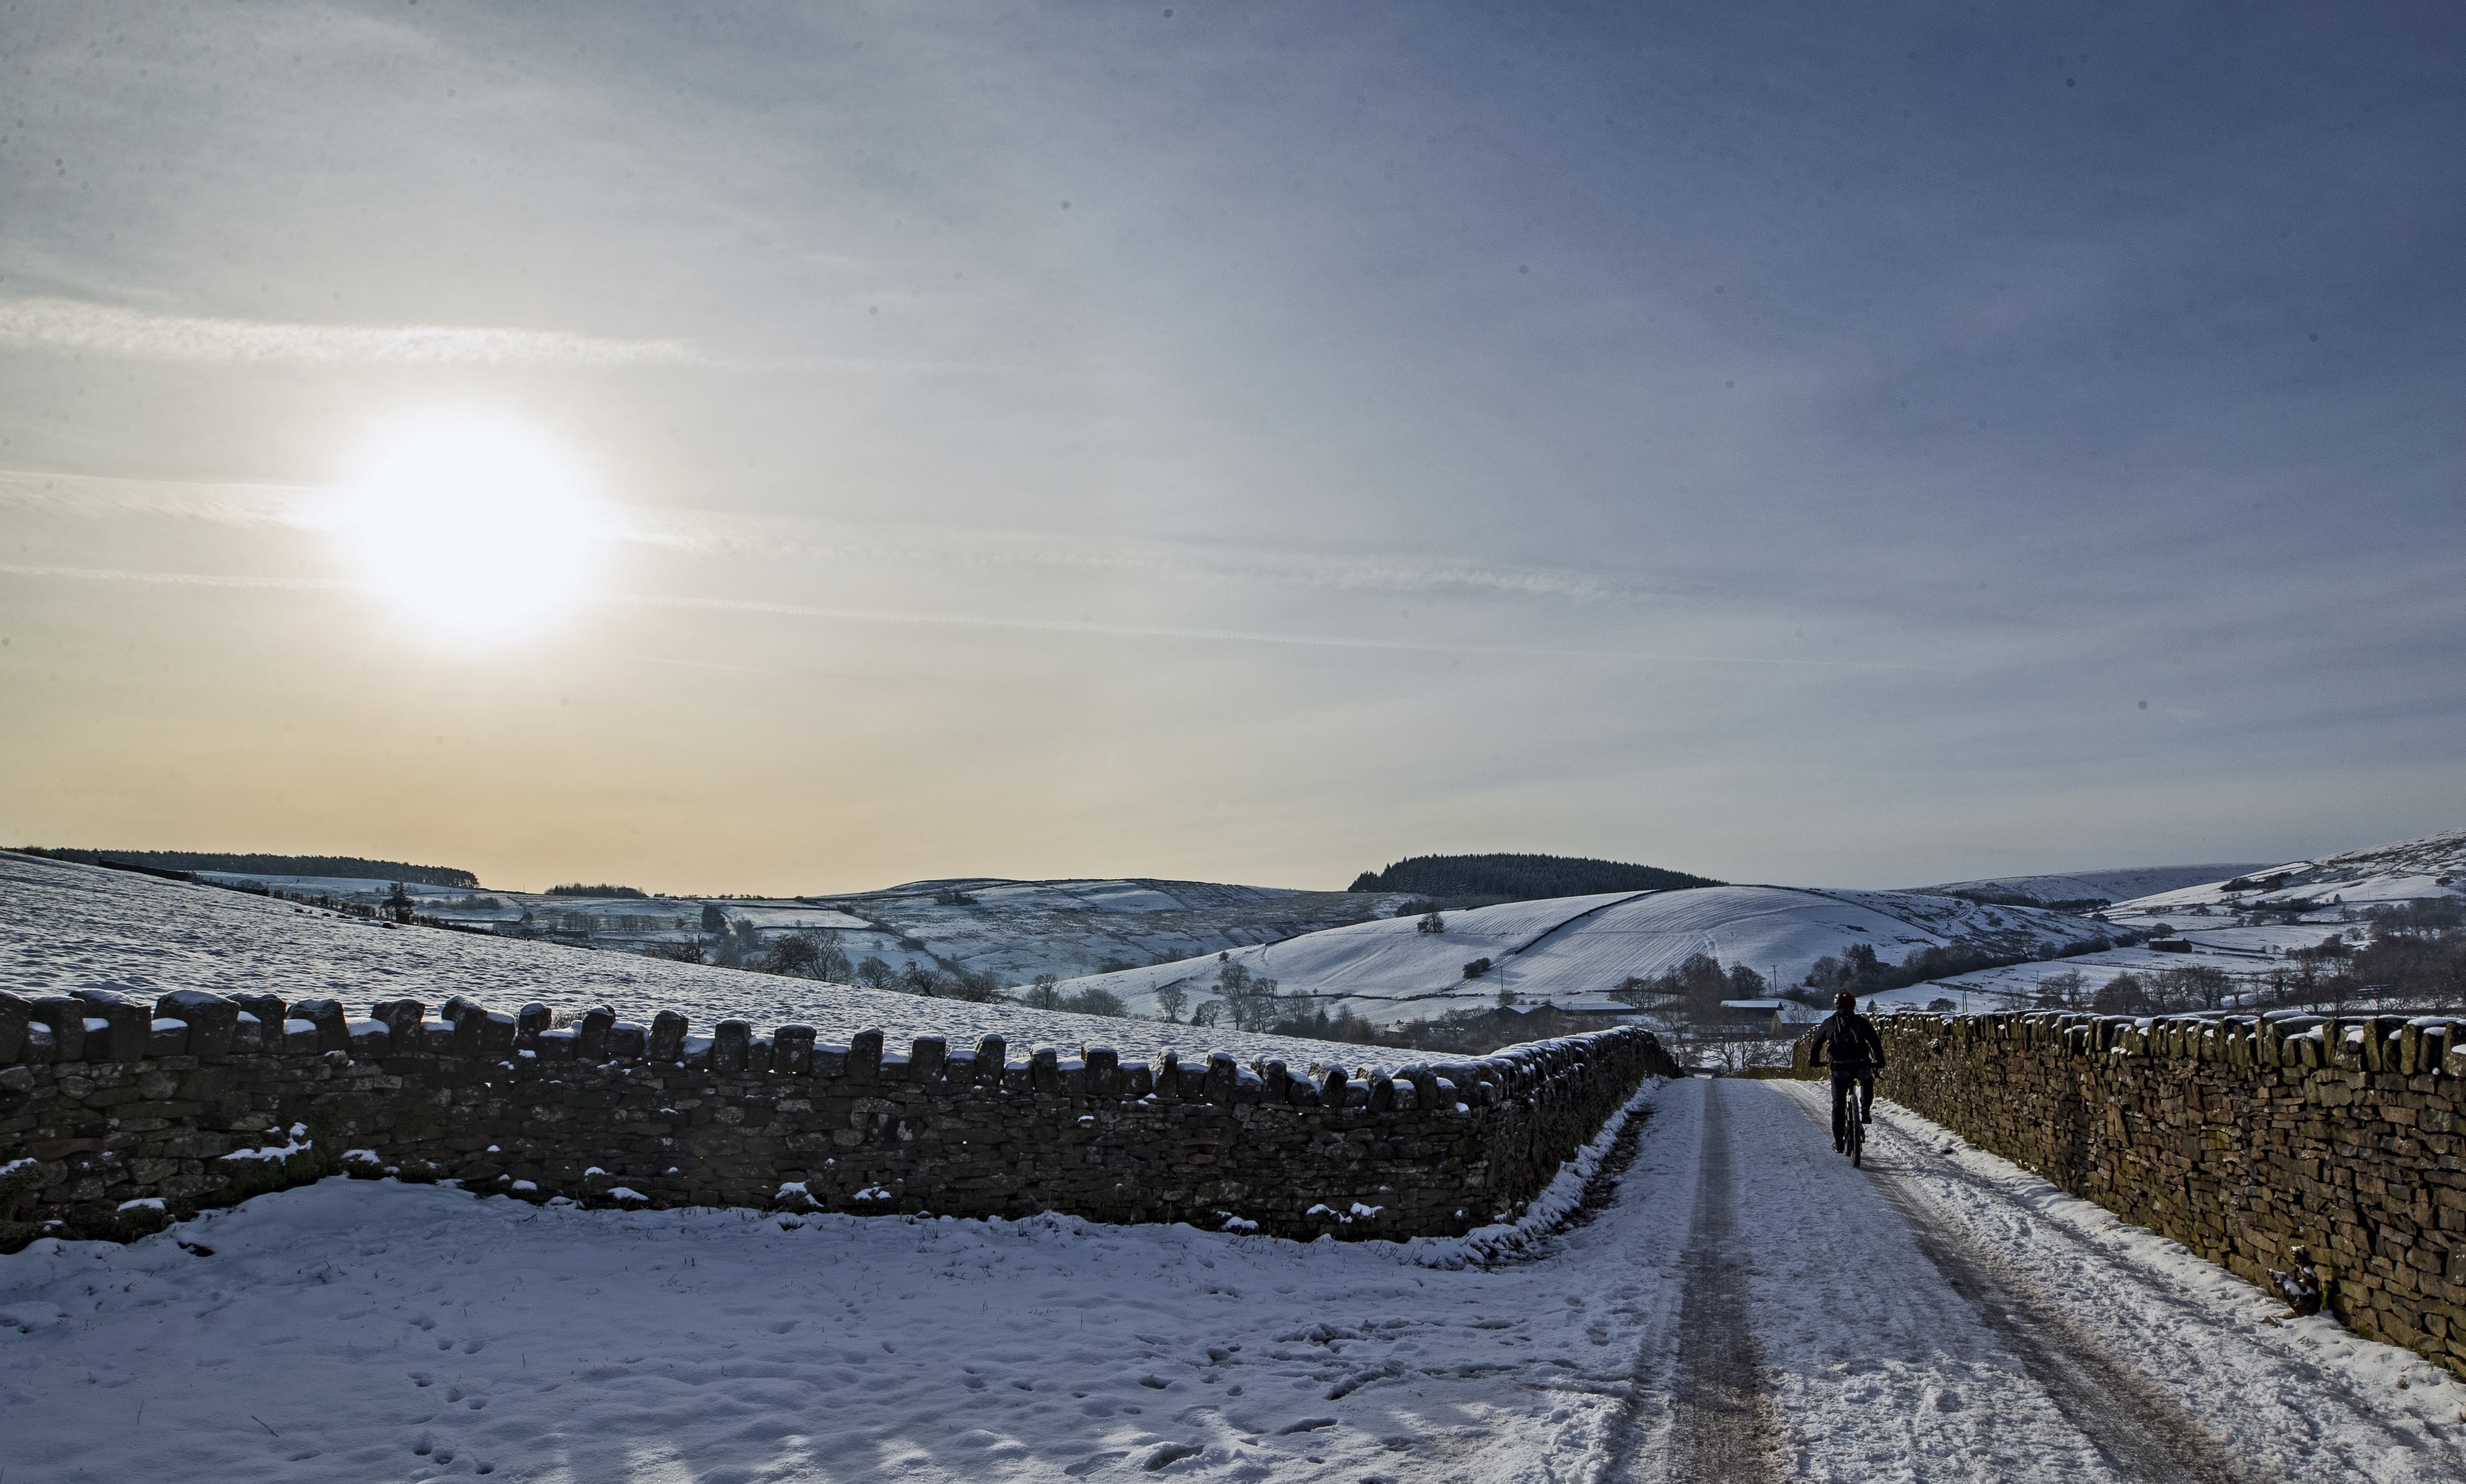 A cyclist on the snow at Blackmoss Reservoir in Barley, Pendle, Lancashire.